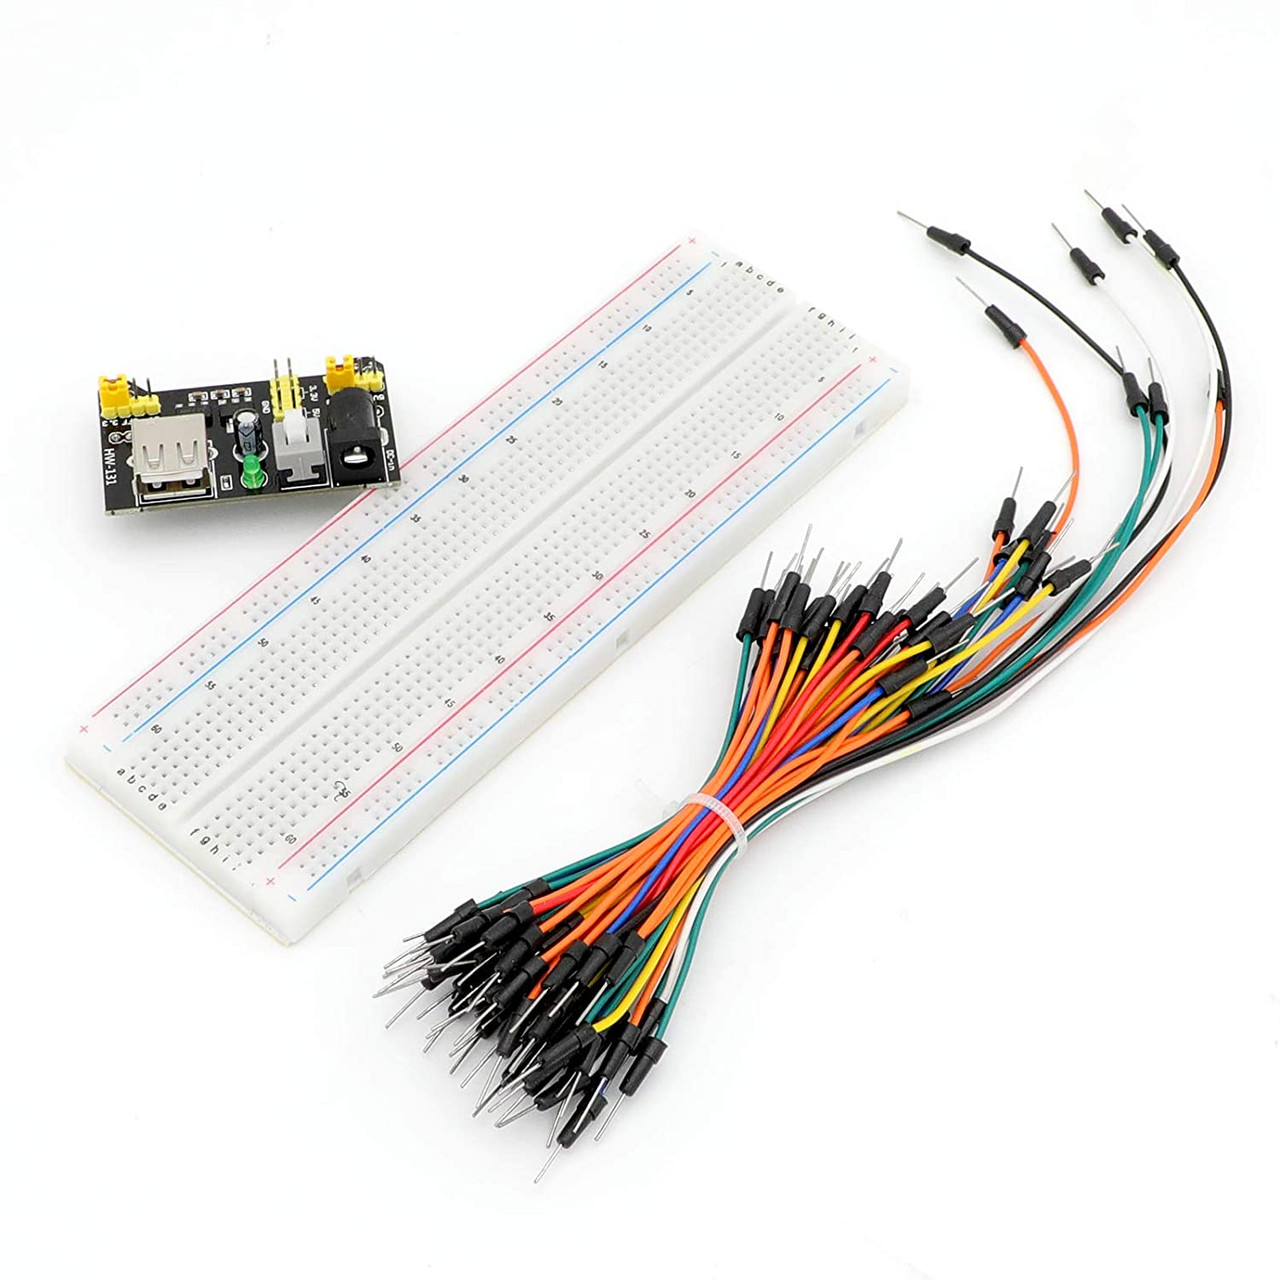 HUAREW Breadboard Kit with Power Supply Module， Jumper Wires，Battery  Clip，830 & 400 tie-Points Breadboard